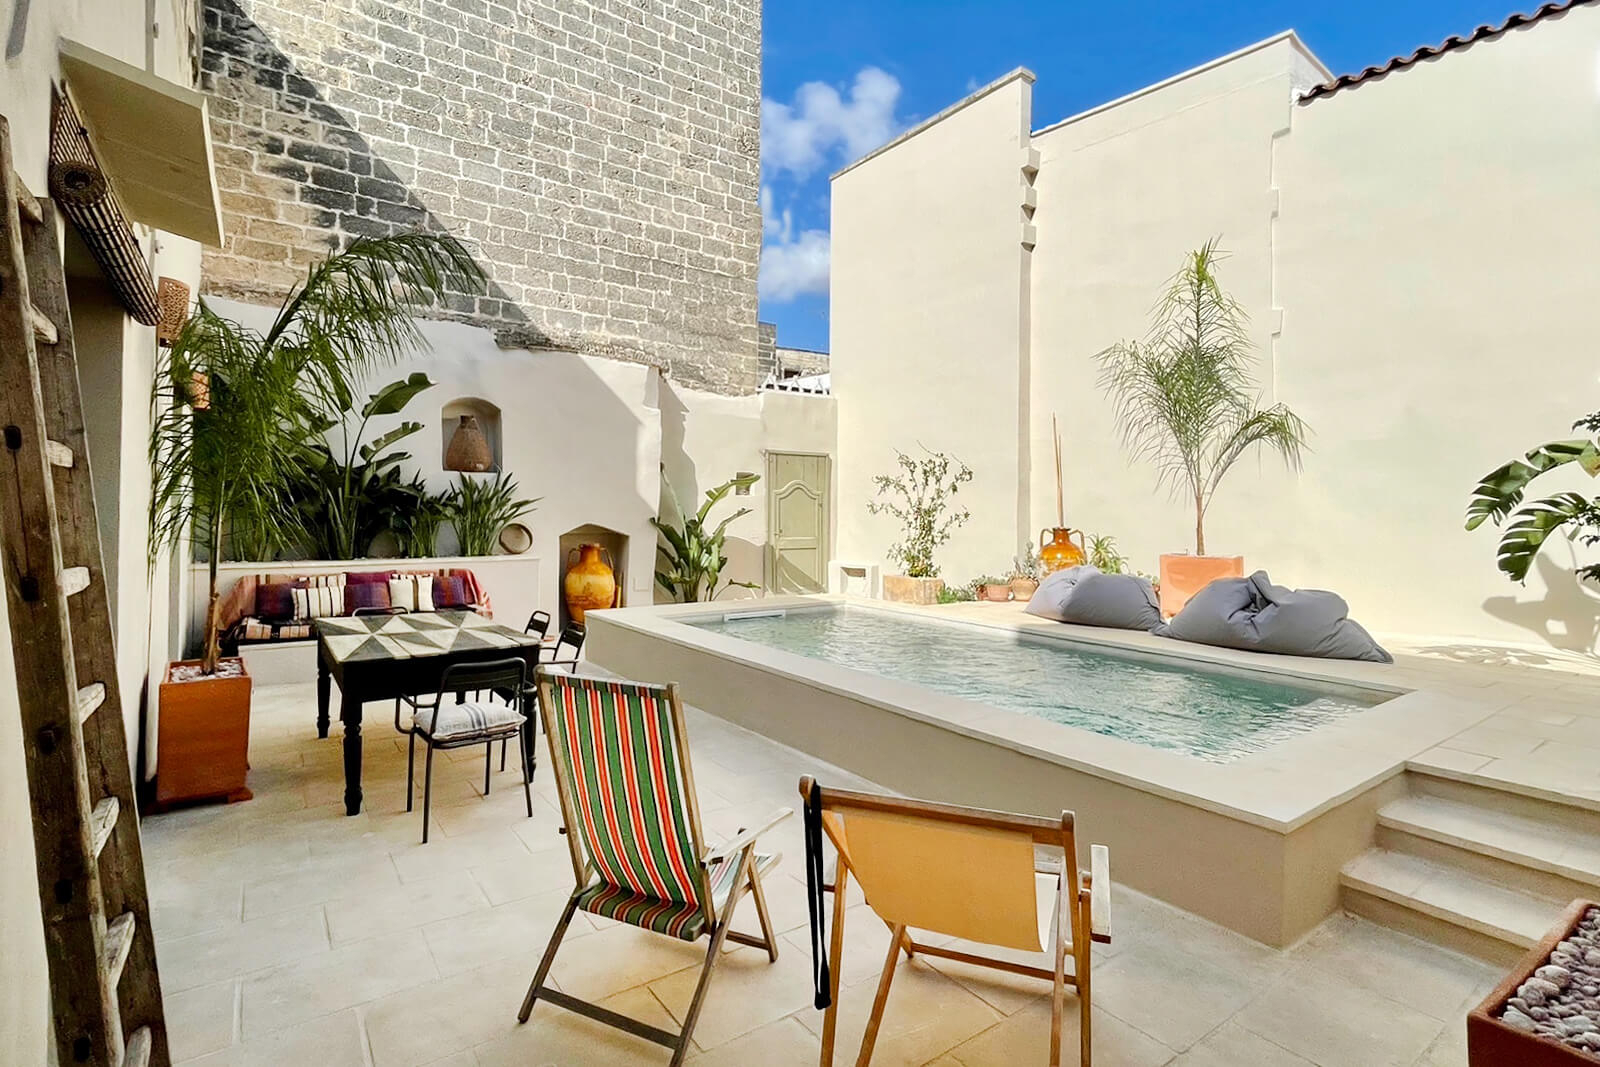 terrace with turquoise pool house Apulia